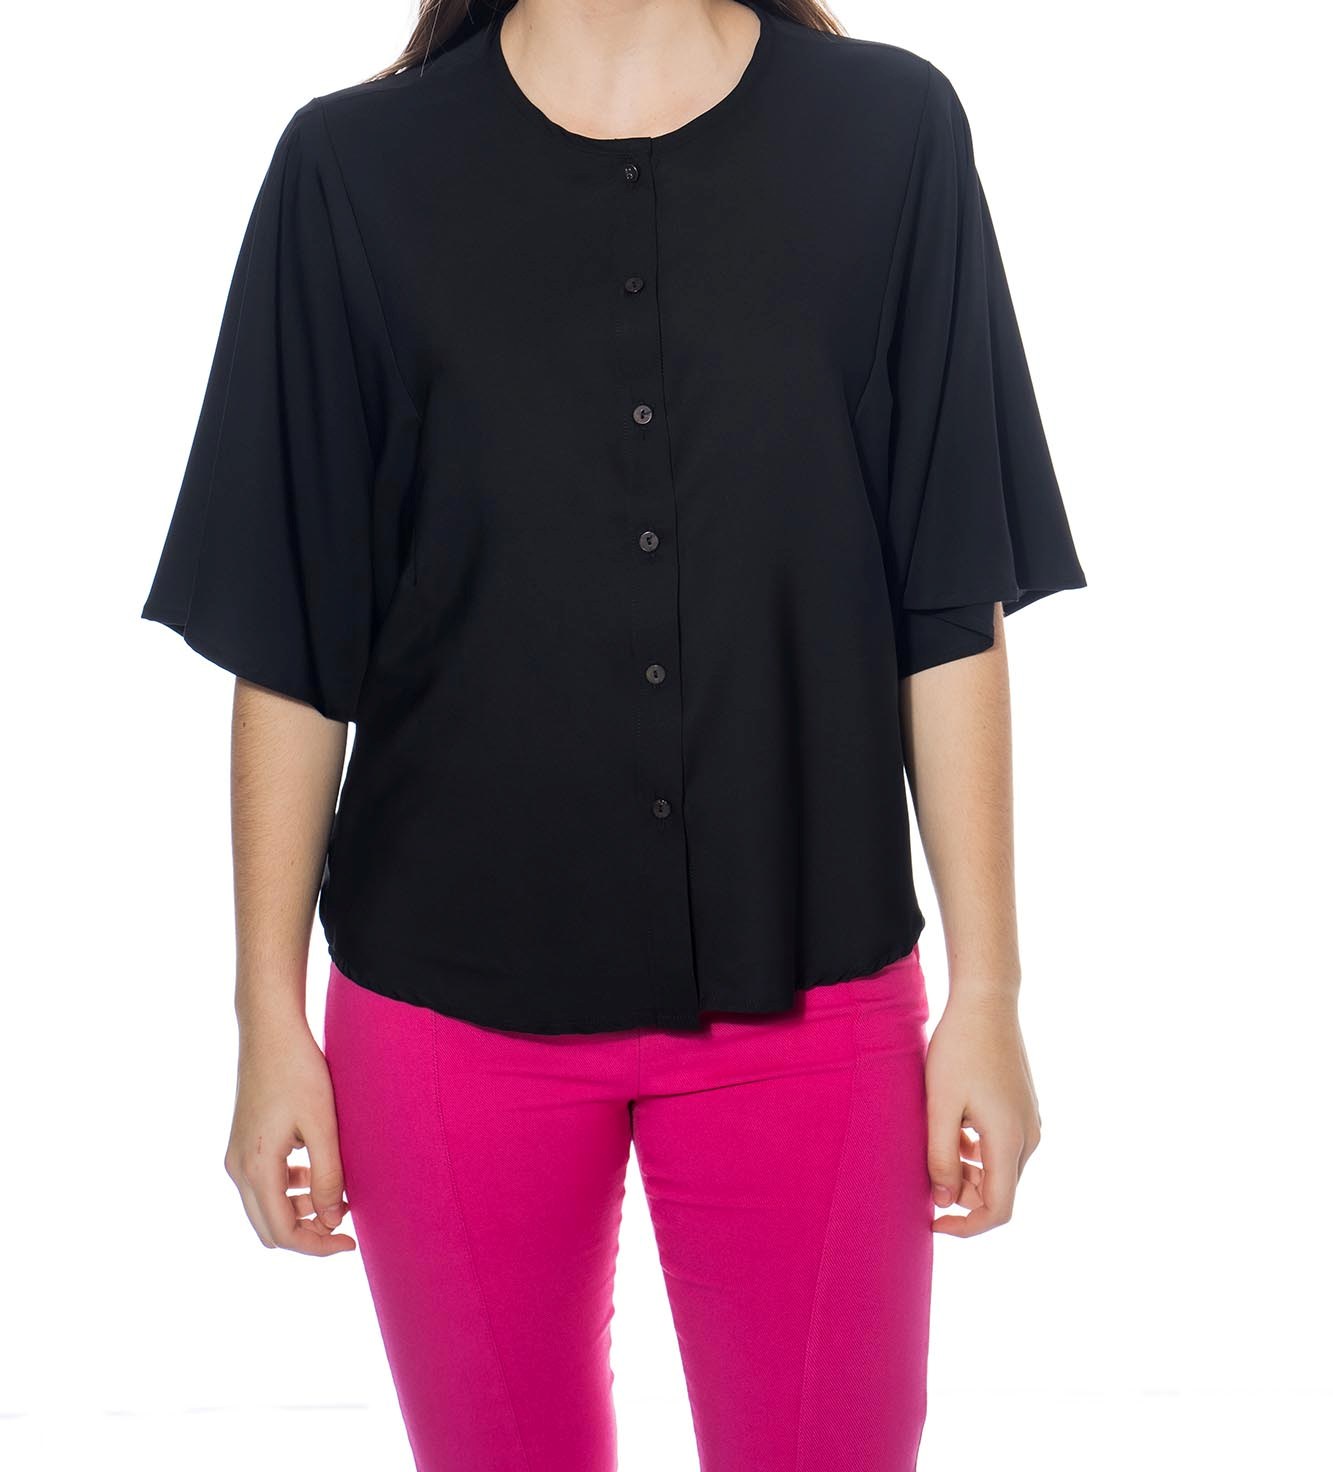 BLUSA BRULLE NEGRO